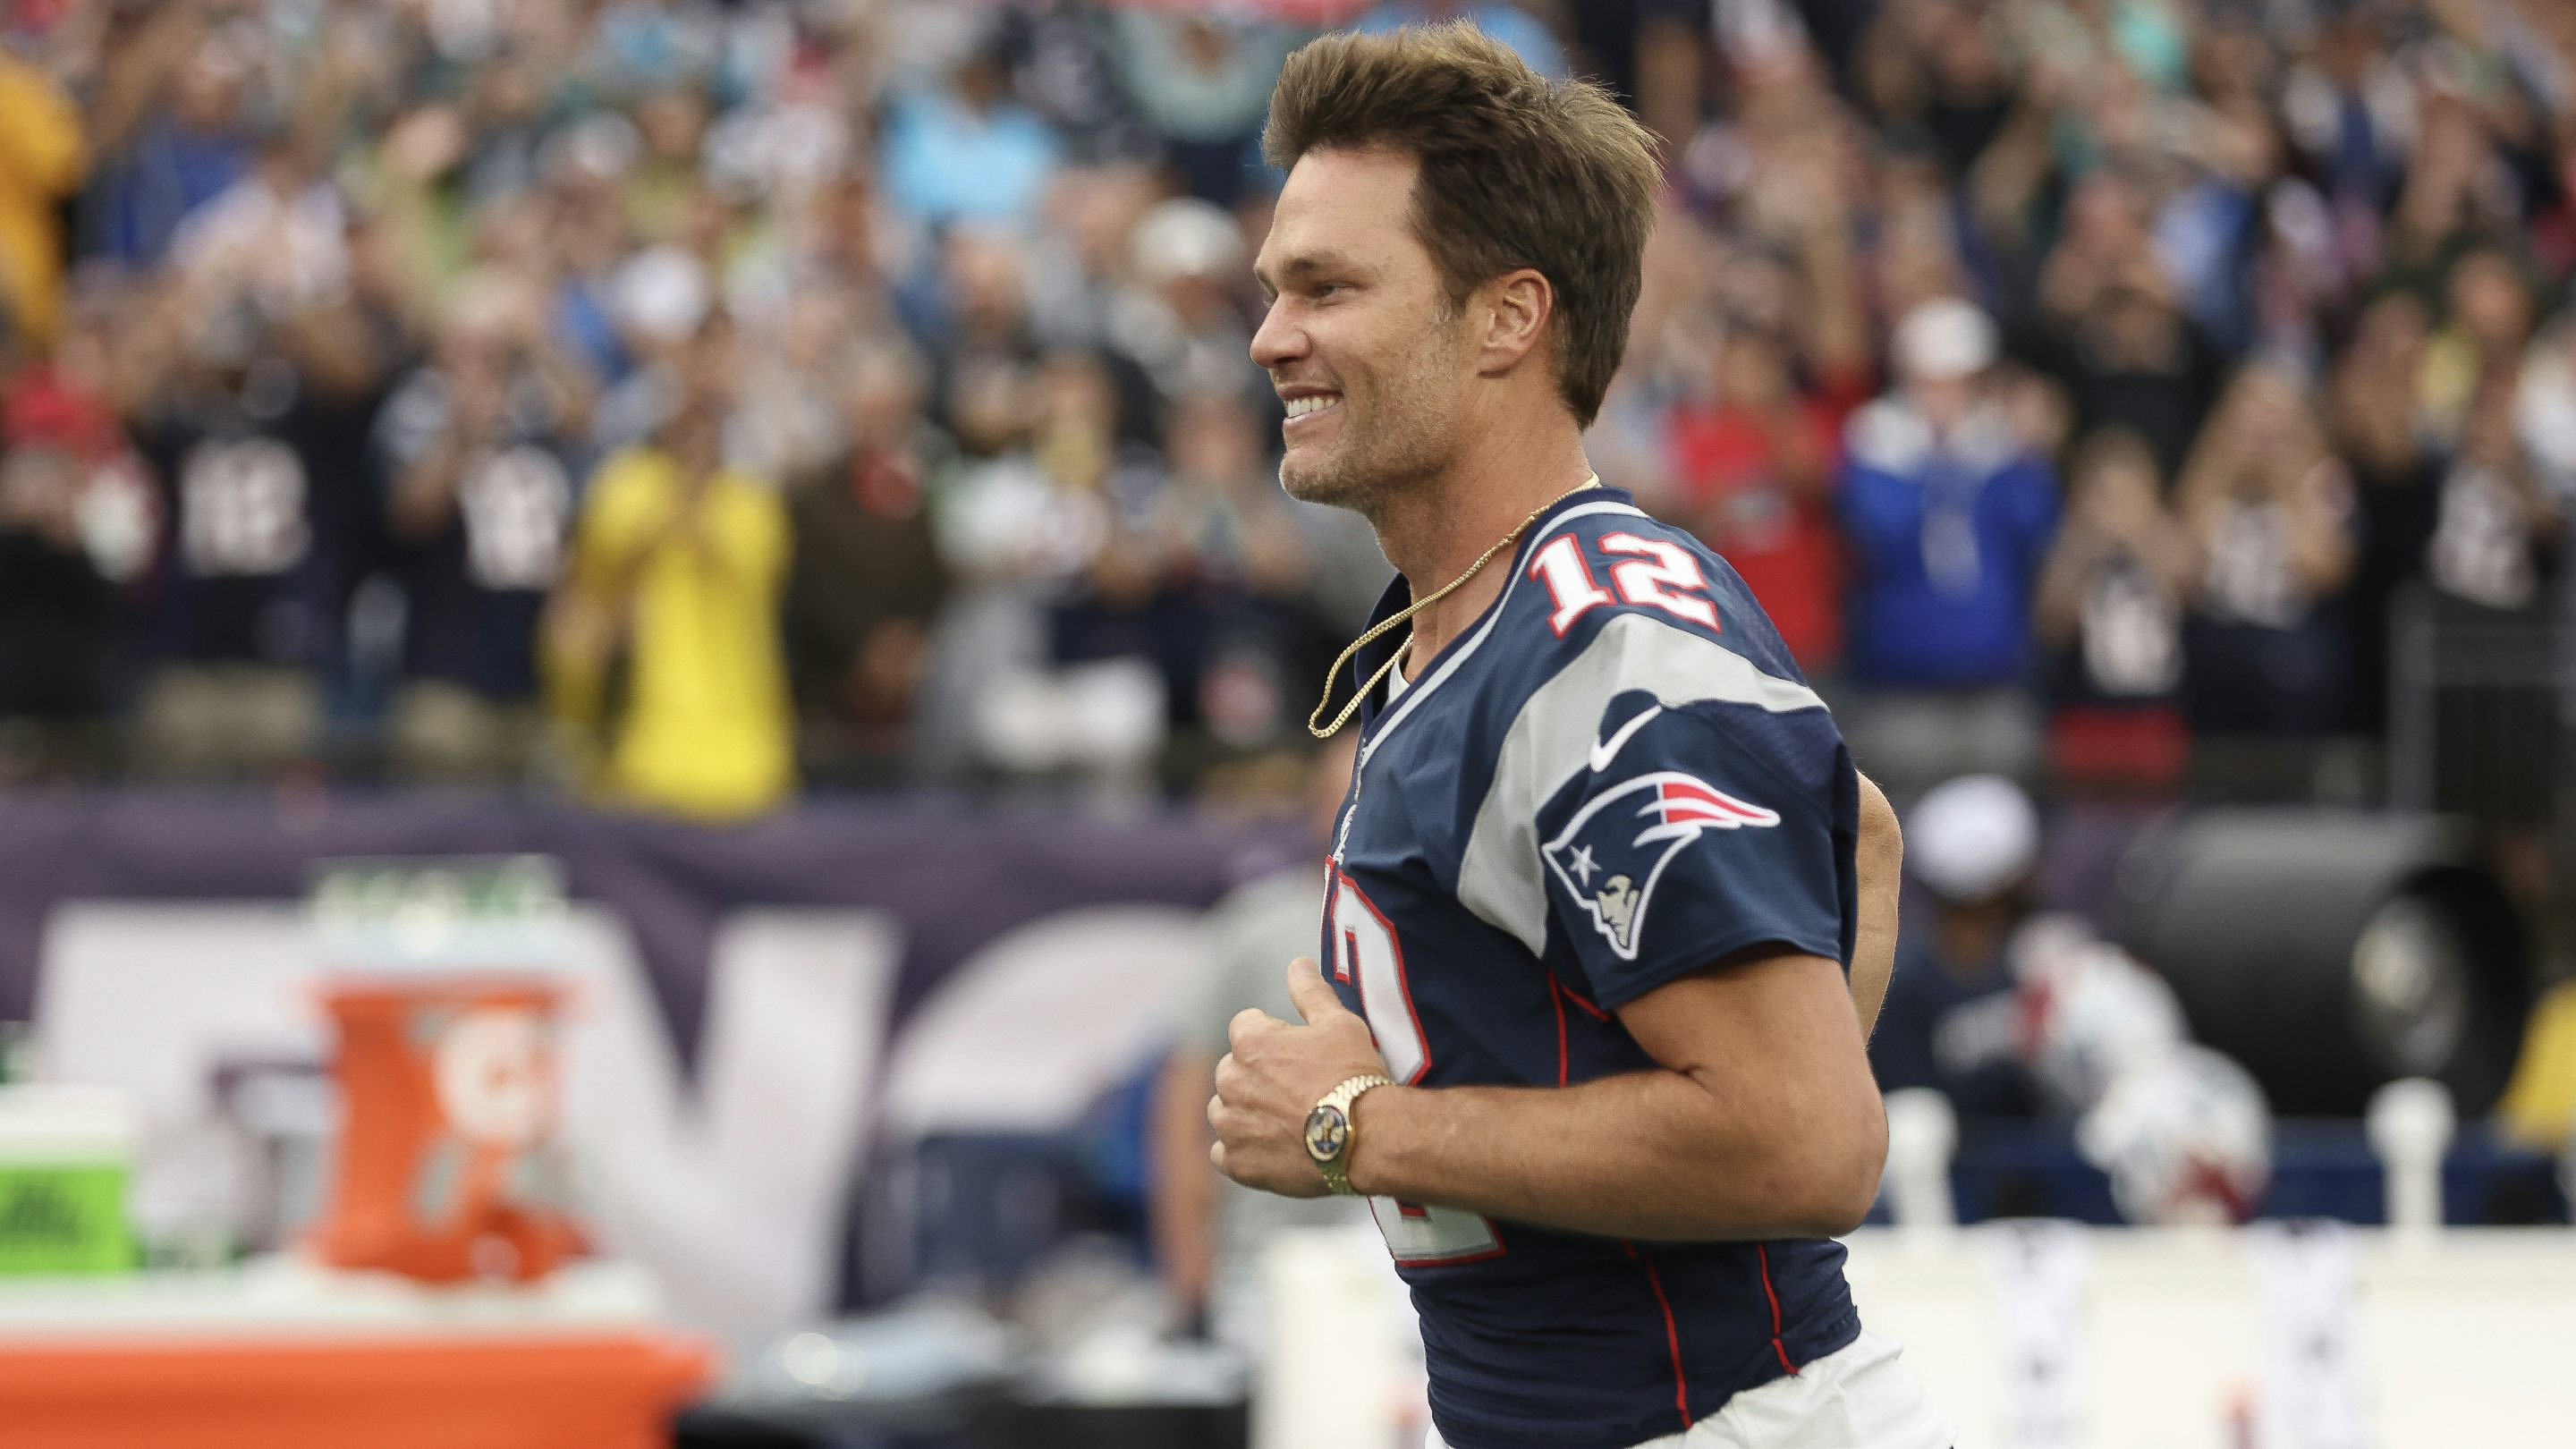 Tom Brady game worn jersey becomes one of most expensive NFL jerseys sold  at auction